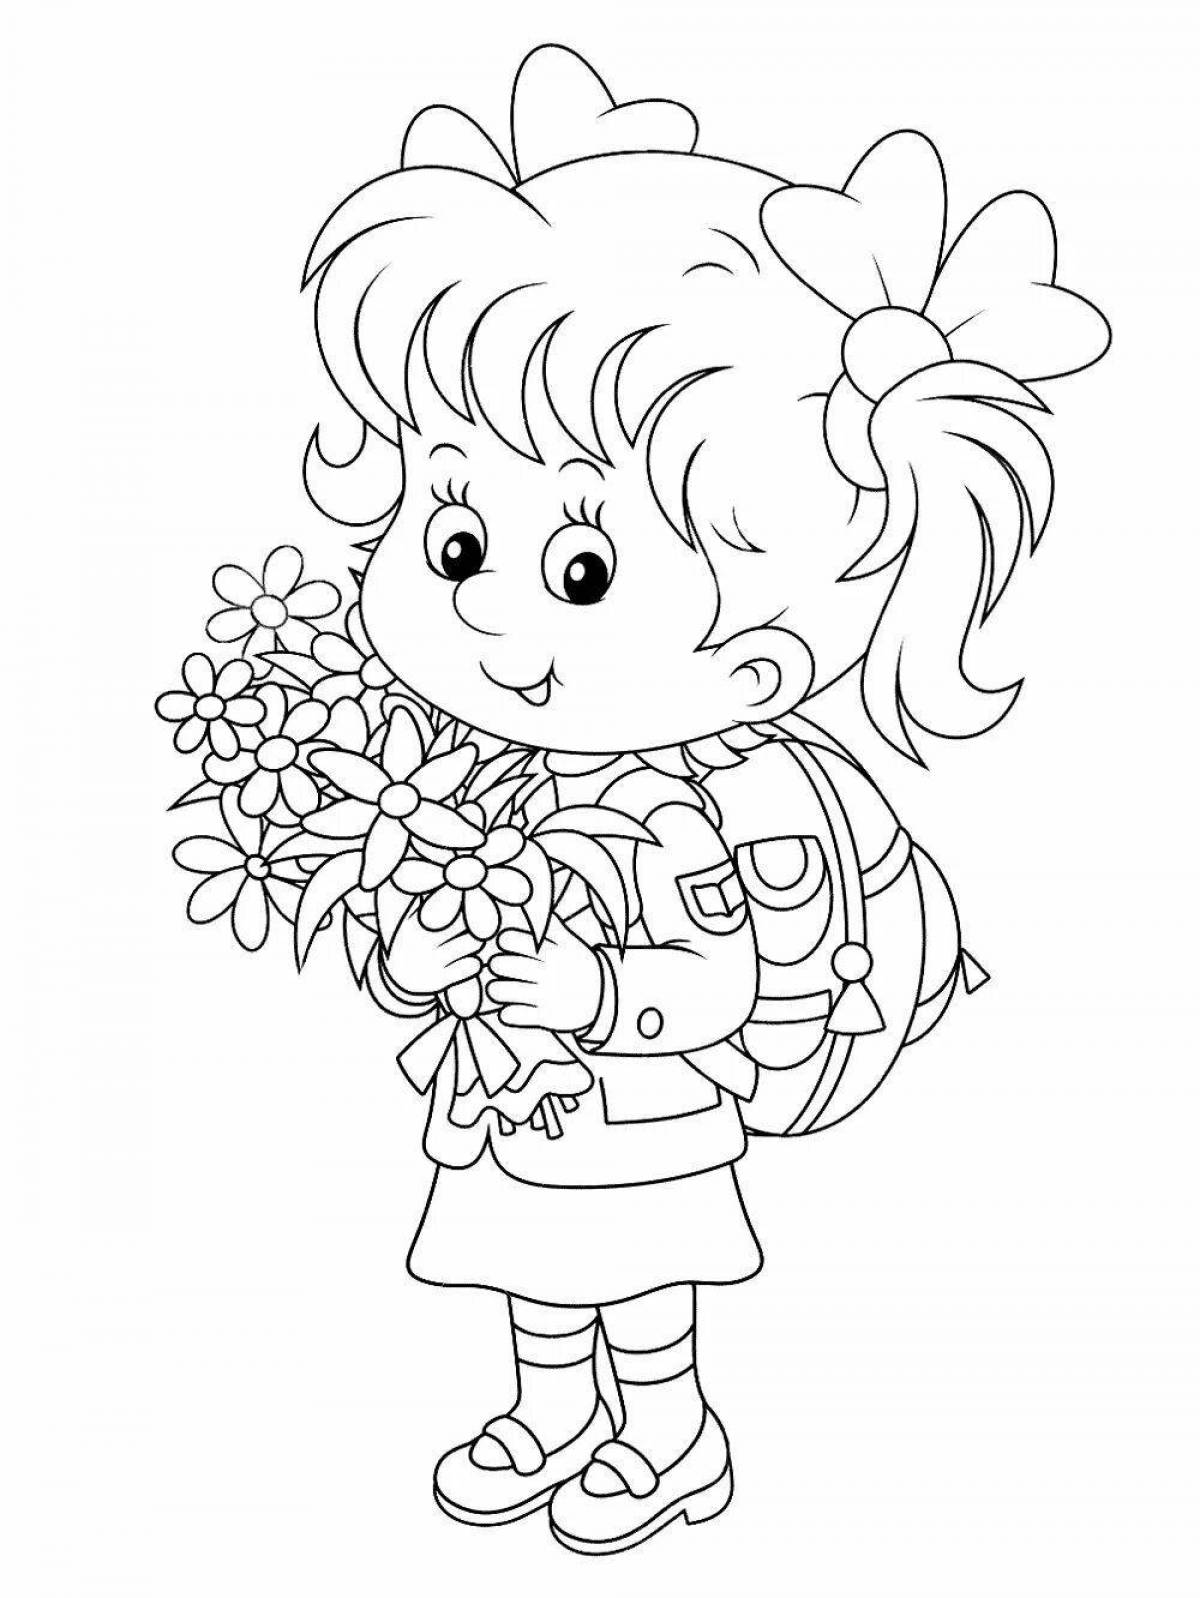 Coloring page cheerful schoolgirl